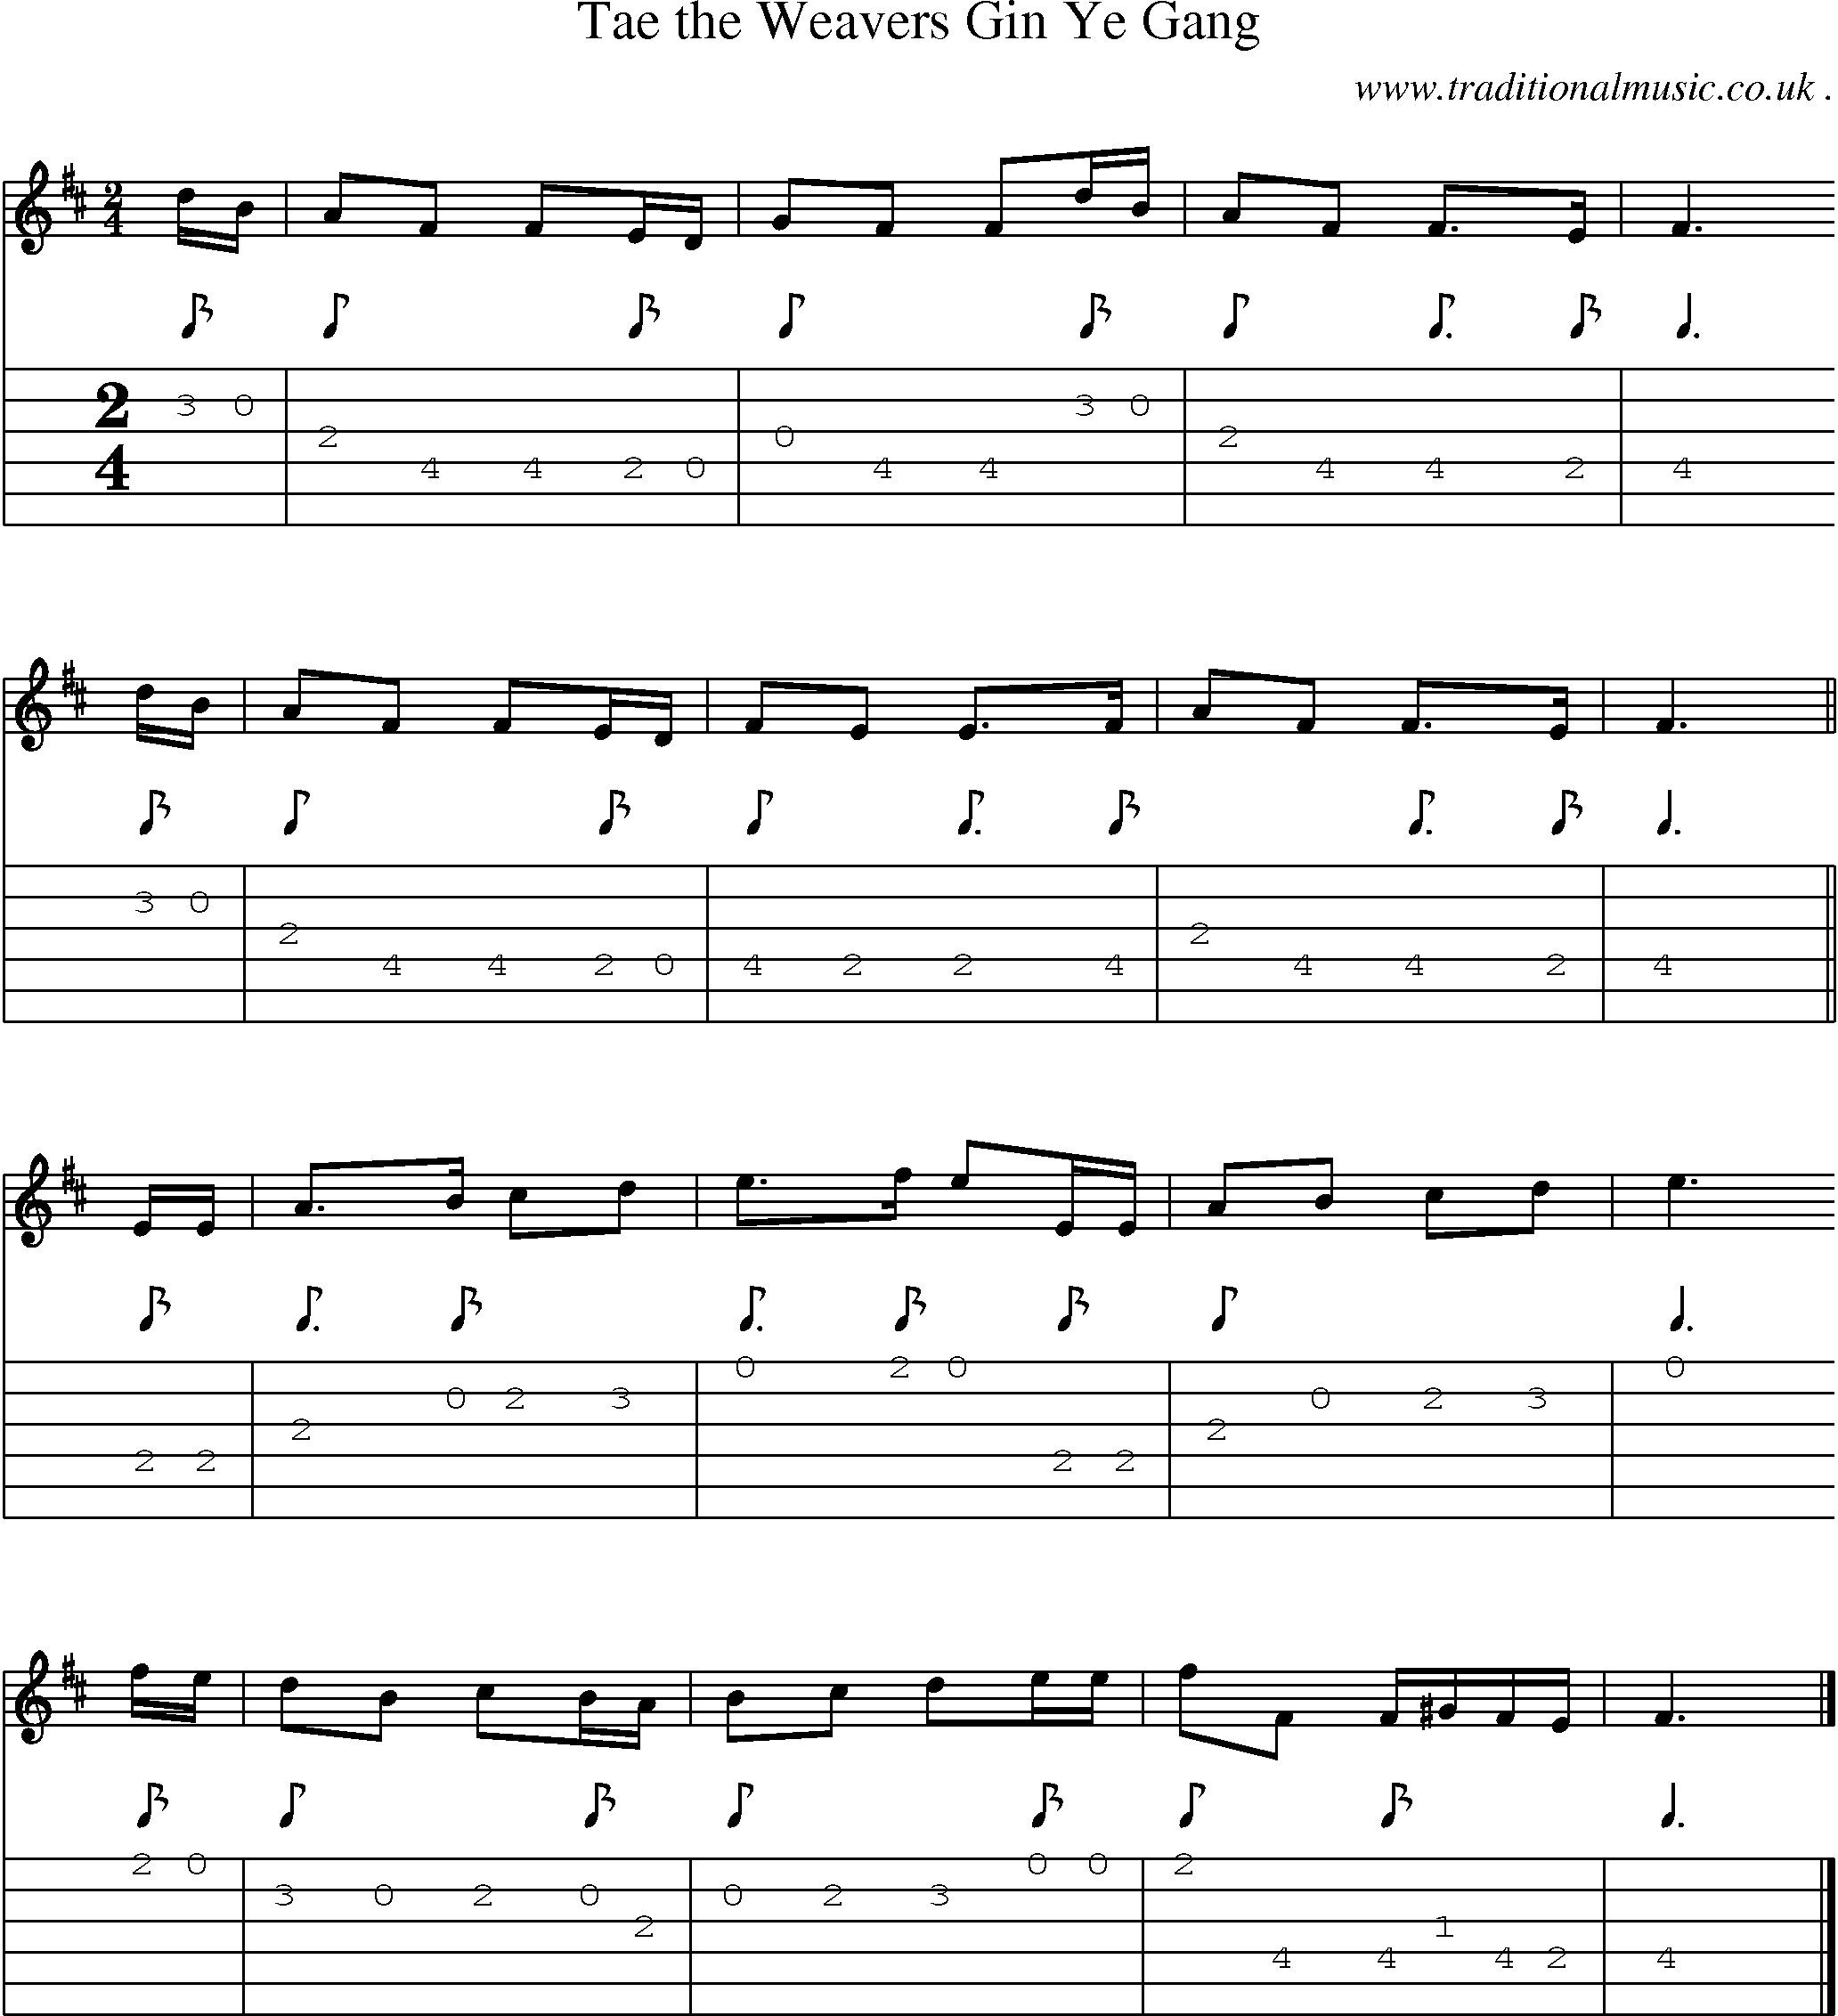 Sheet-music  score, Chords and Guitar Tabs for Tae The Weavers Gin Ye Gang